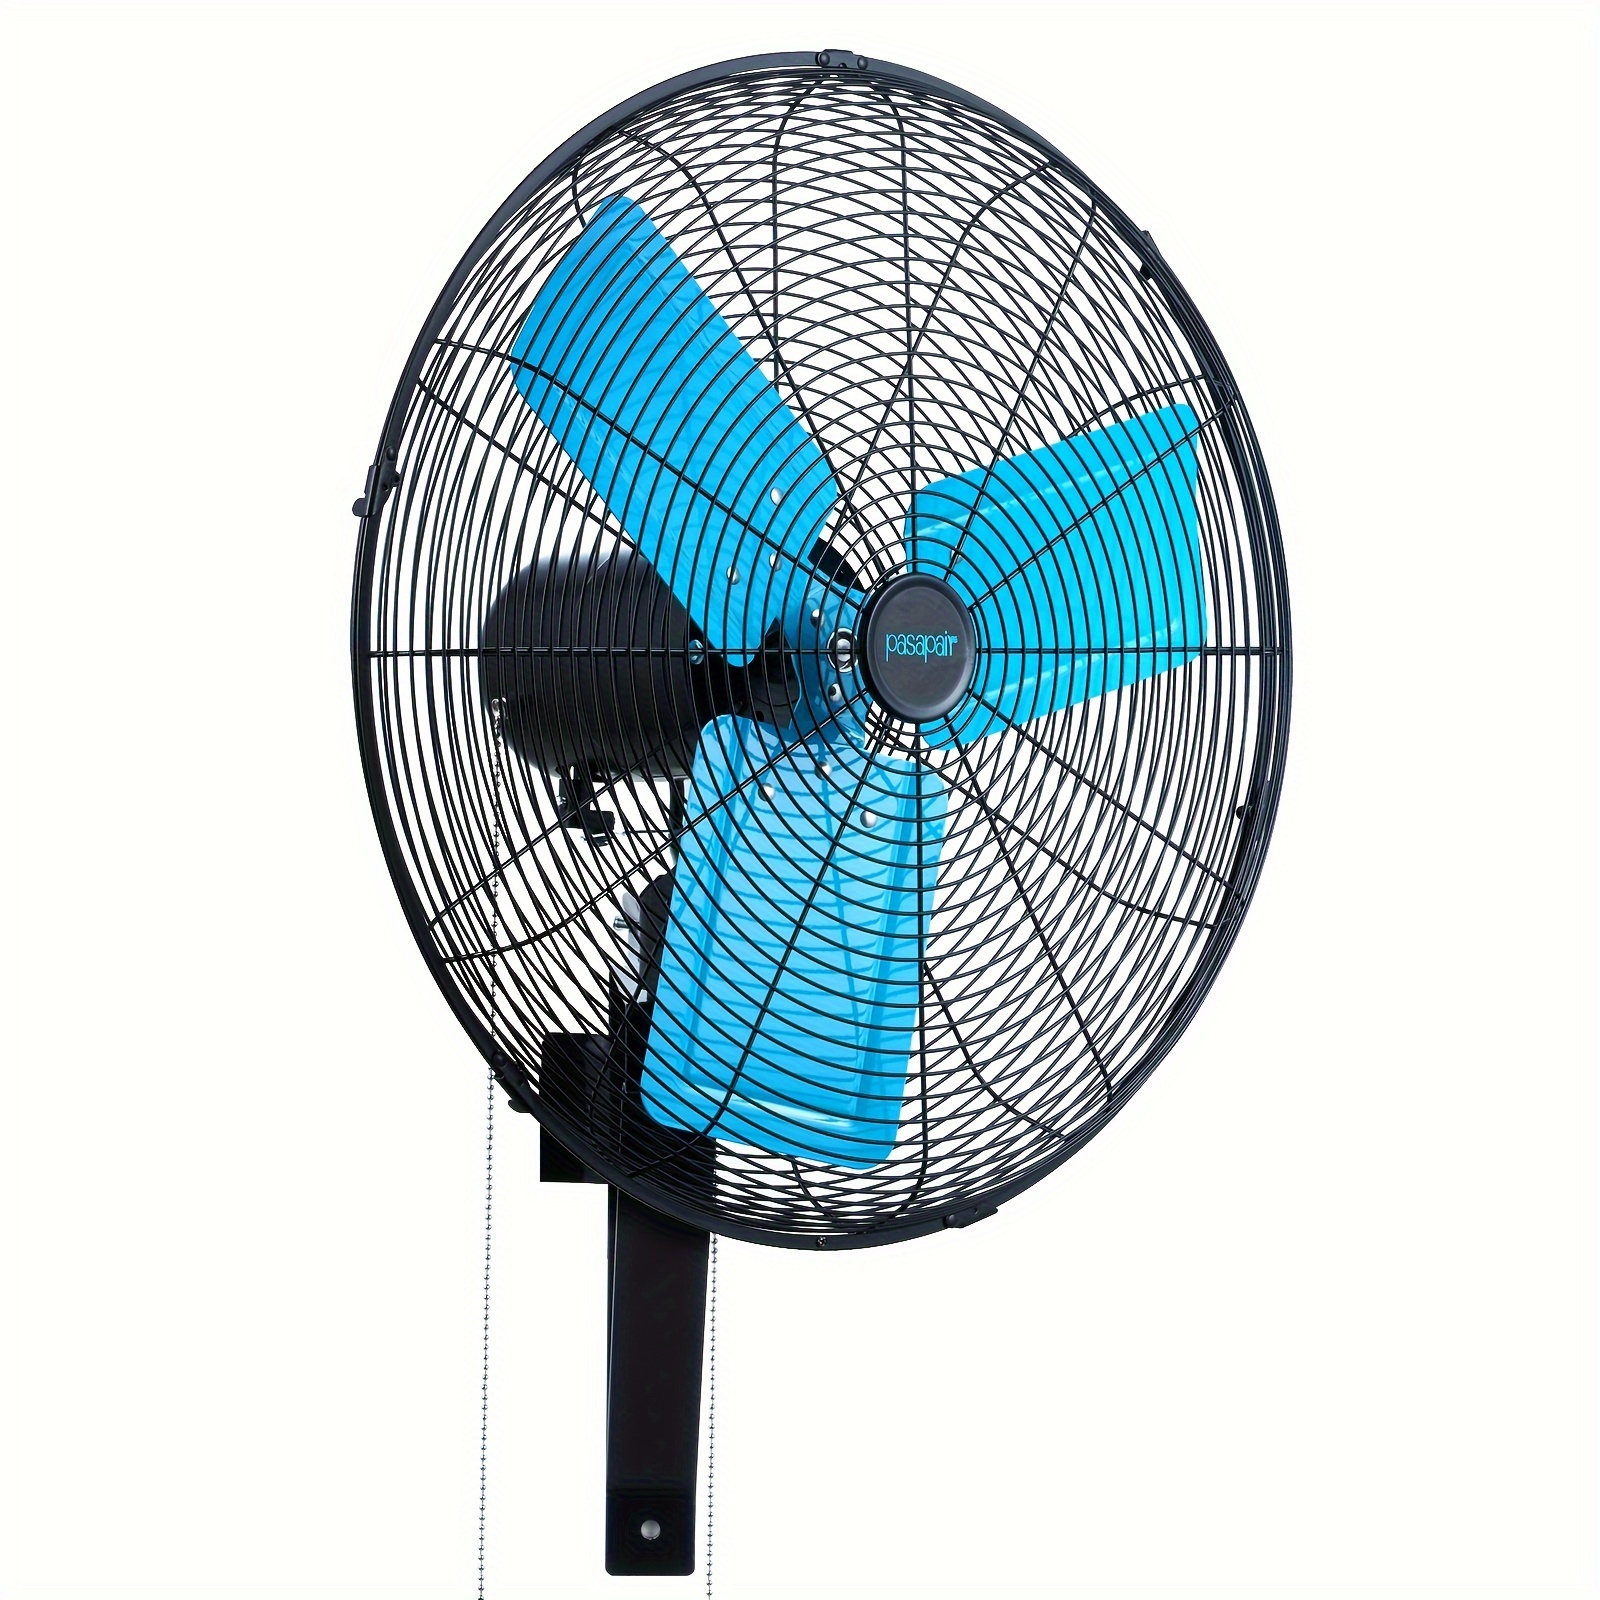 

20 Inch Industrial Oscilating Wall Fan-4012 Cfm Large Fan With Safety Pulg-wall Mount 90° Oscillation For Garage And Patios-3-speeds, Etl Approved, 2.5m Power Cord